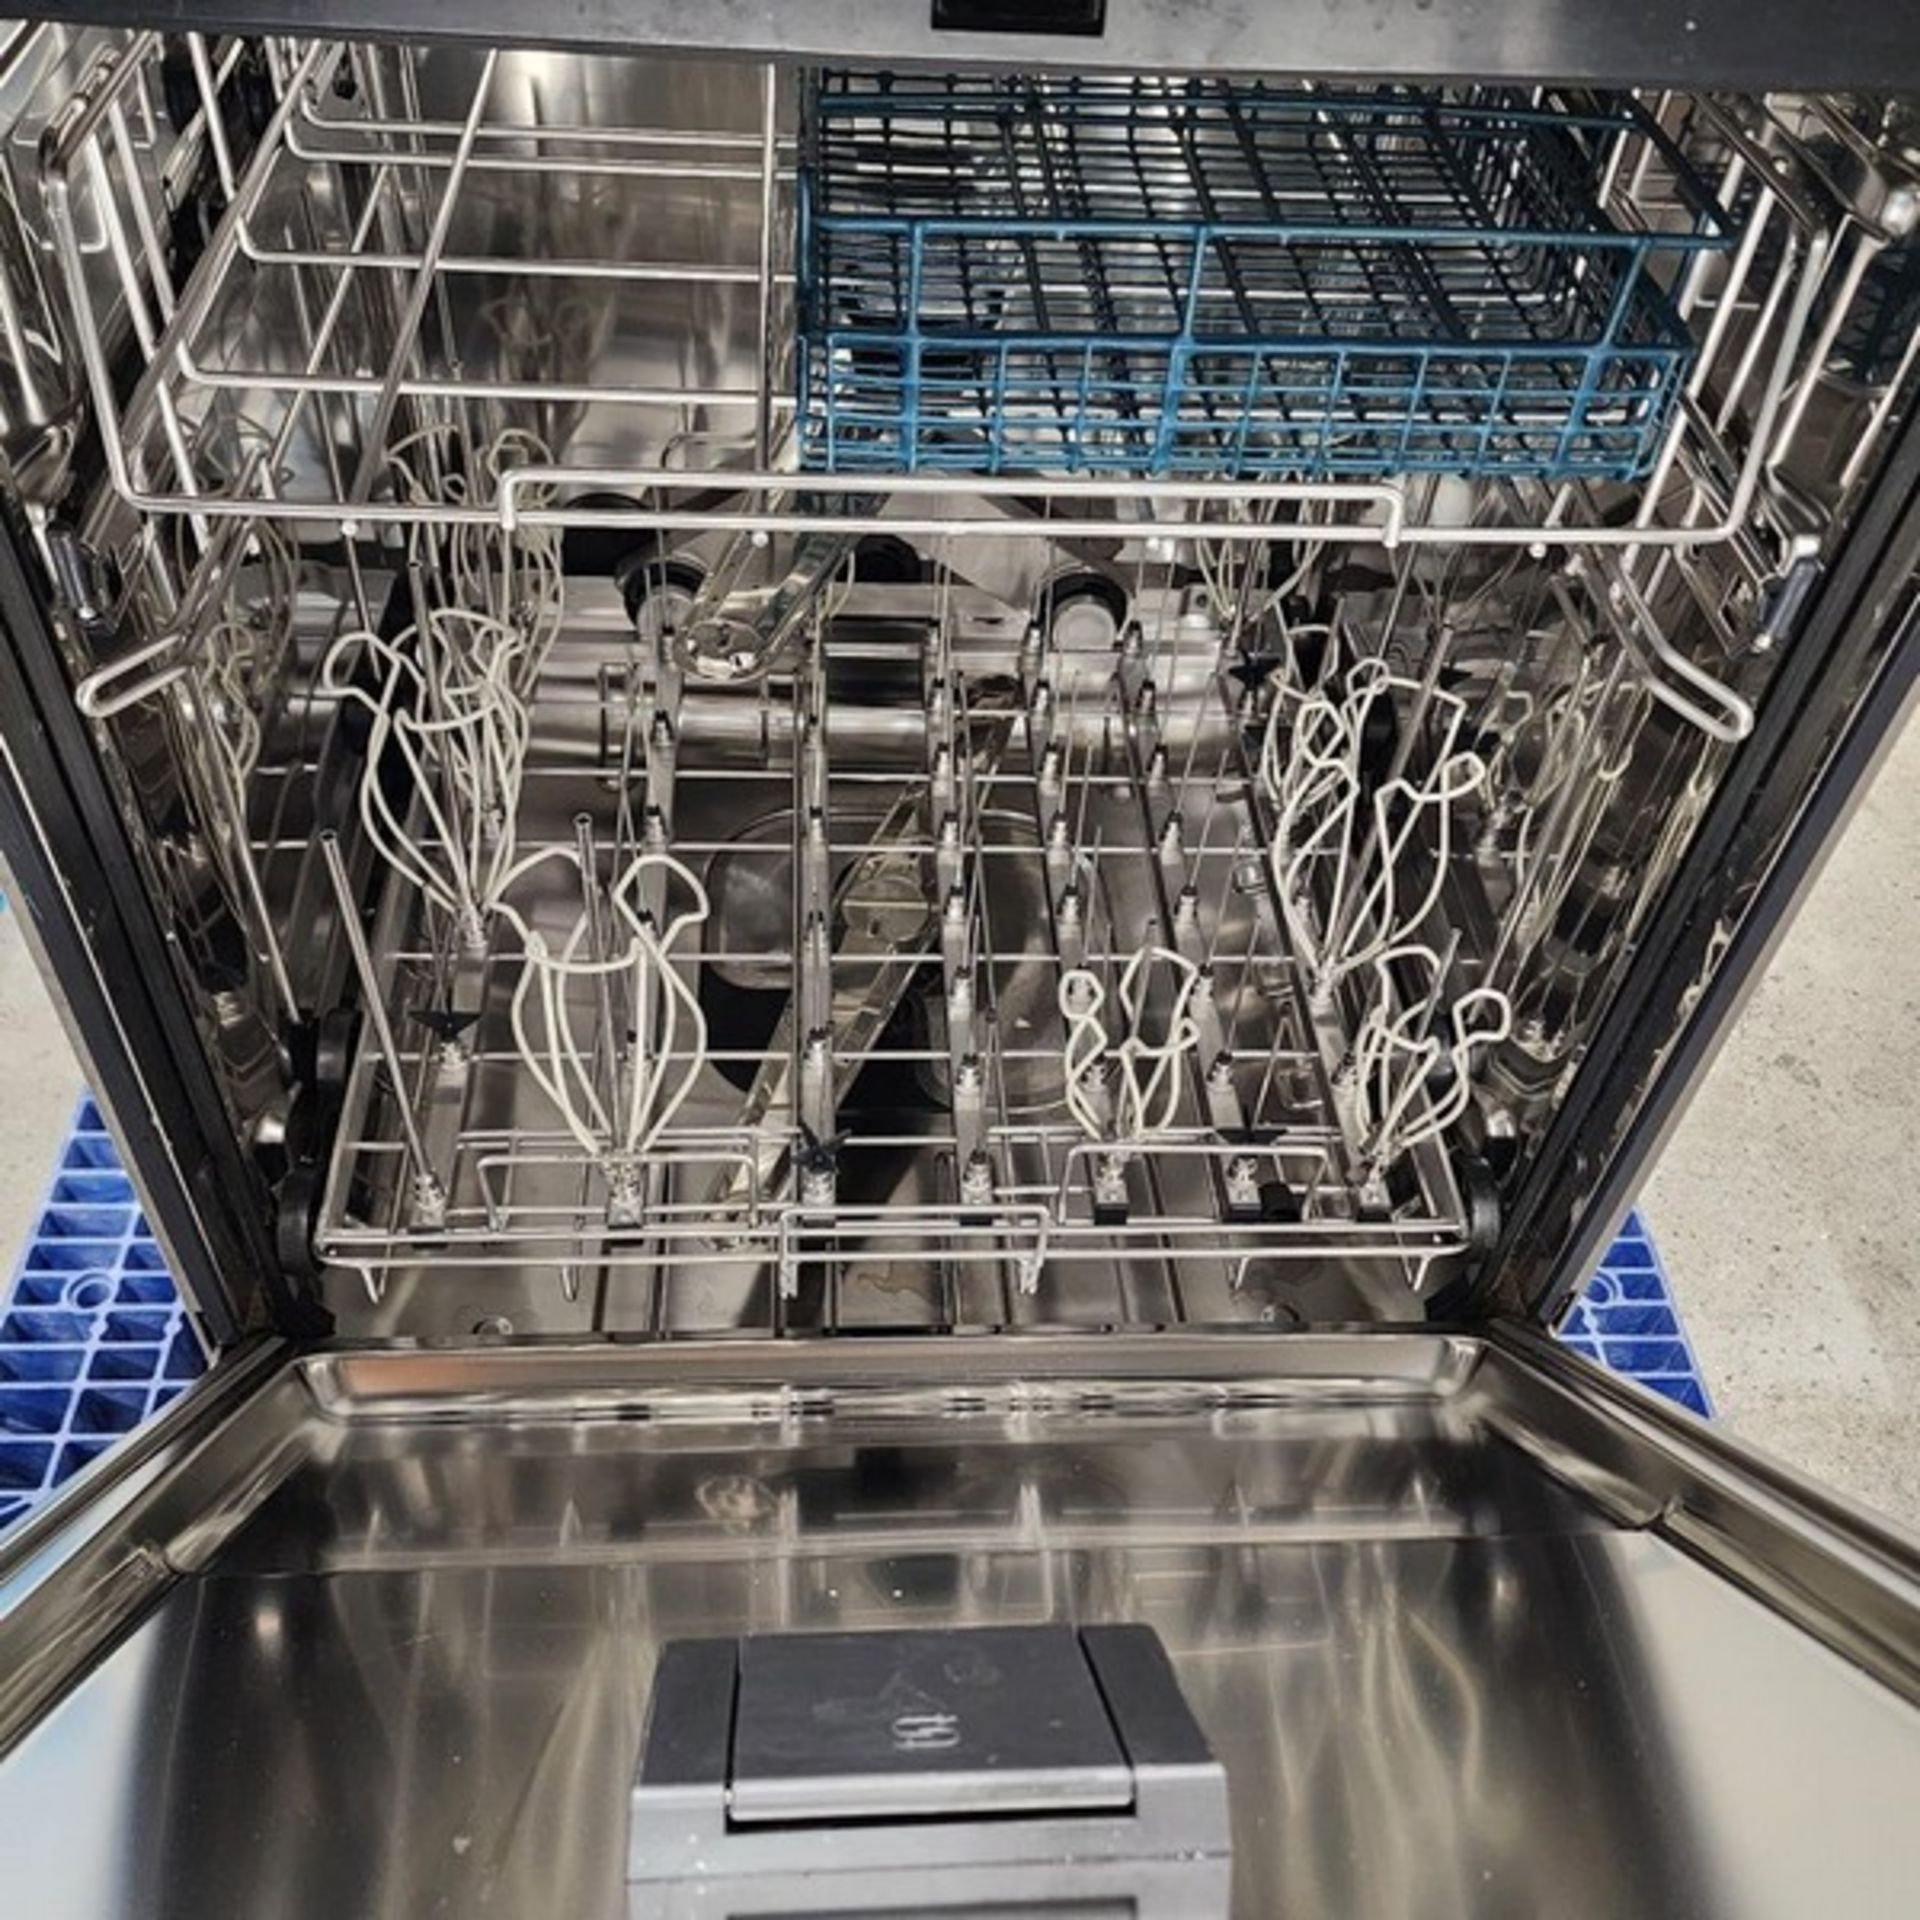 Miele Commercial Dishwasher high-quality Model PG 8583. Electric specifications: 208 volts, 60hz, - Bild 5 aus 7